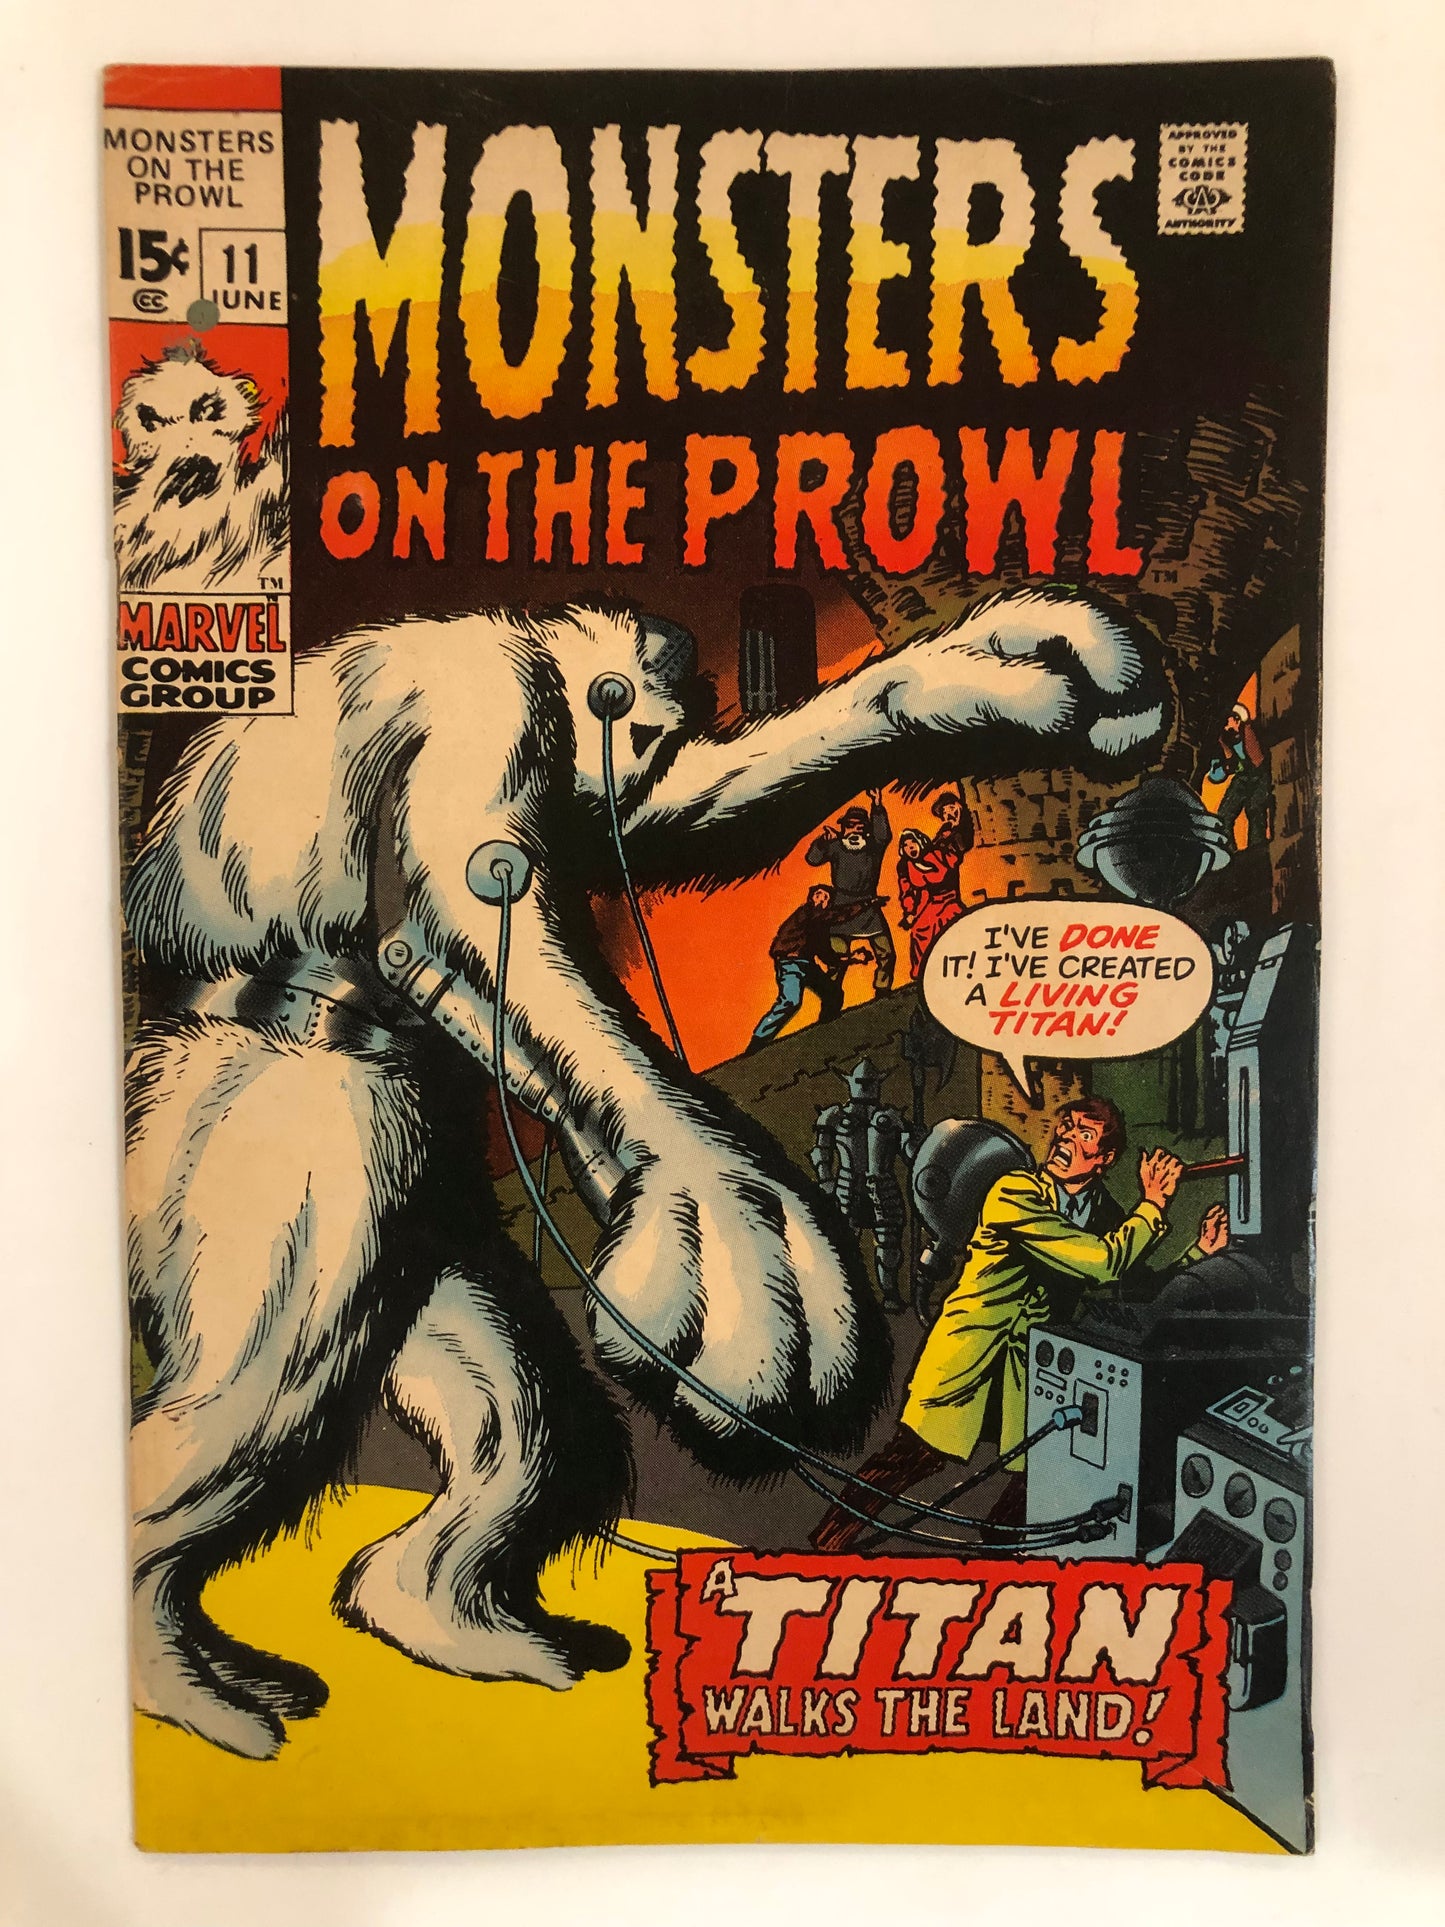 Monsters On The Prowl #11